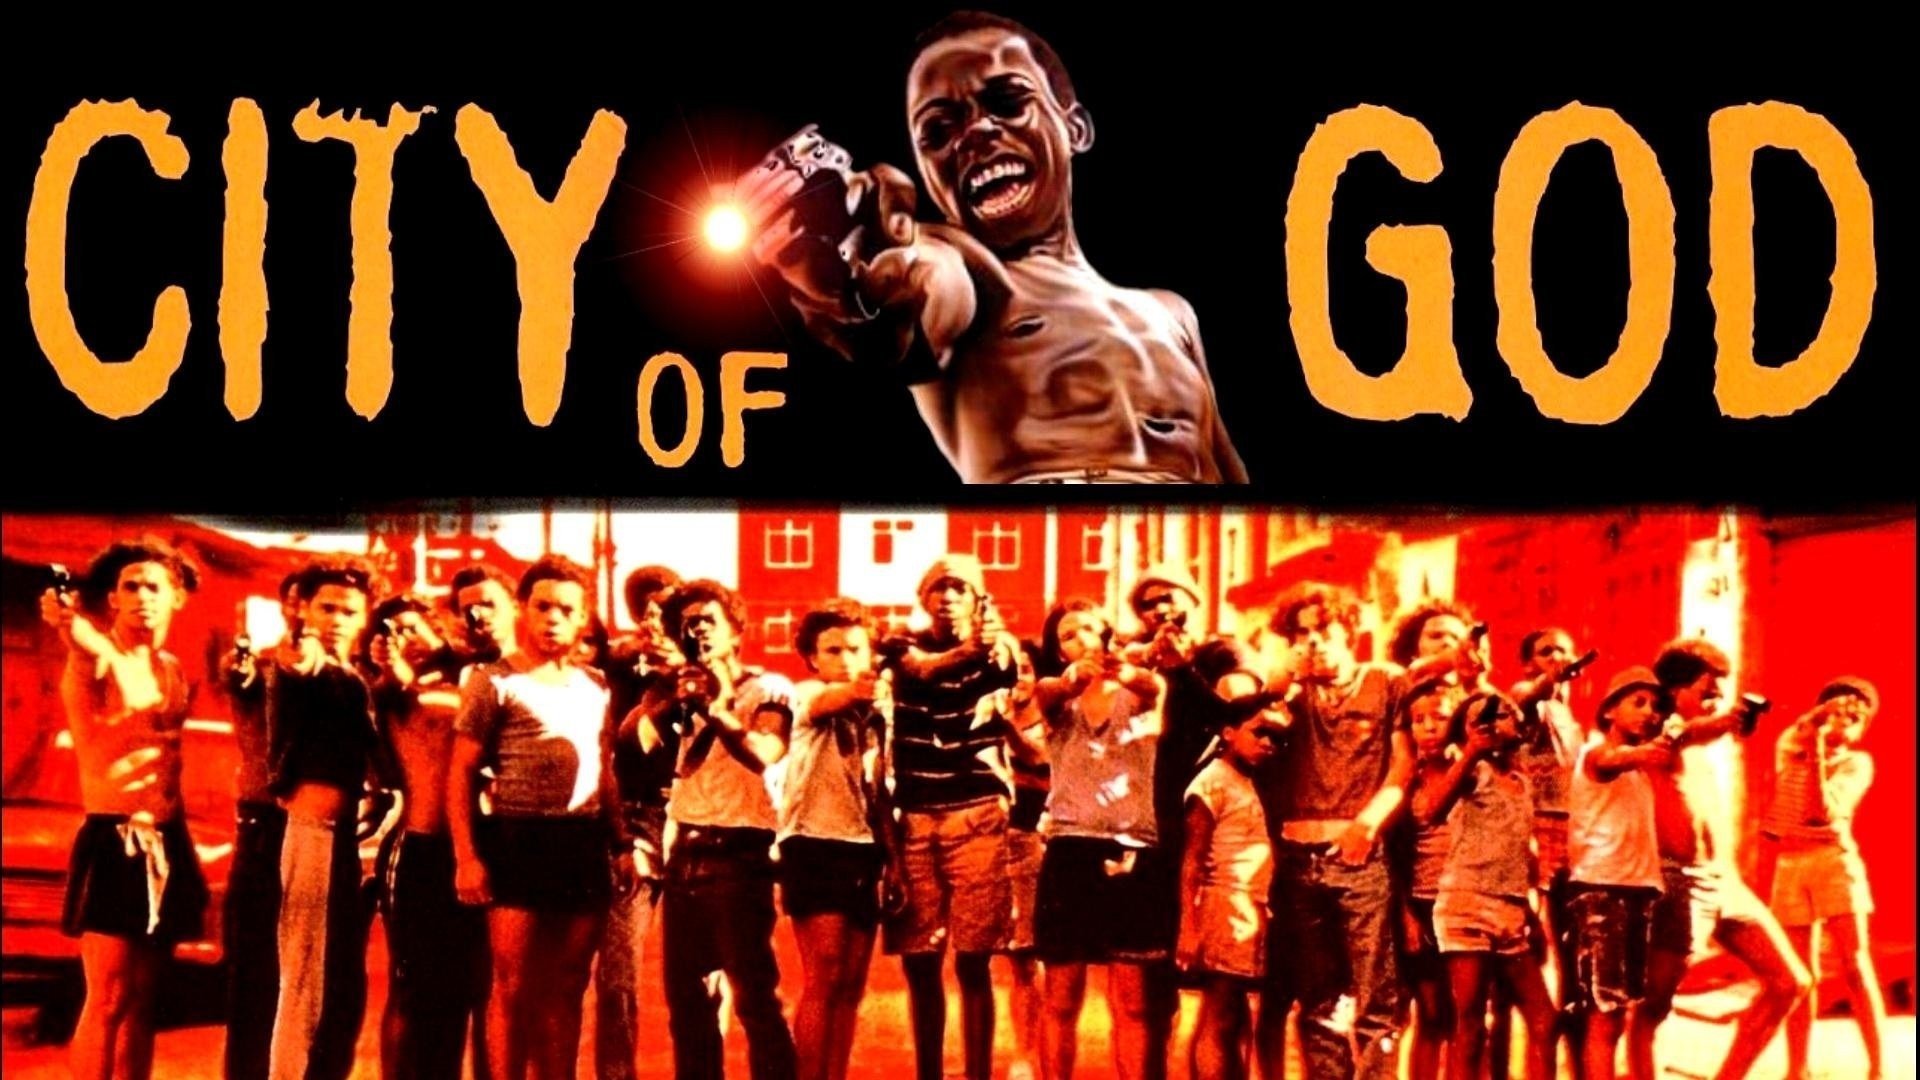 City Of God HD Wallpaper Background Image